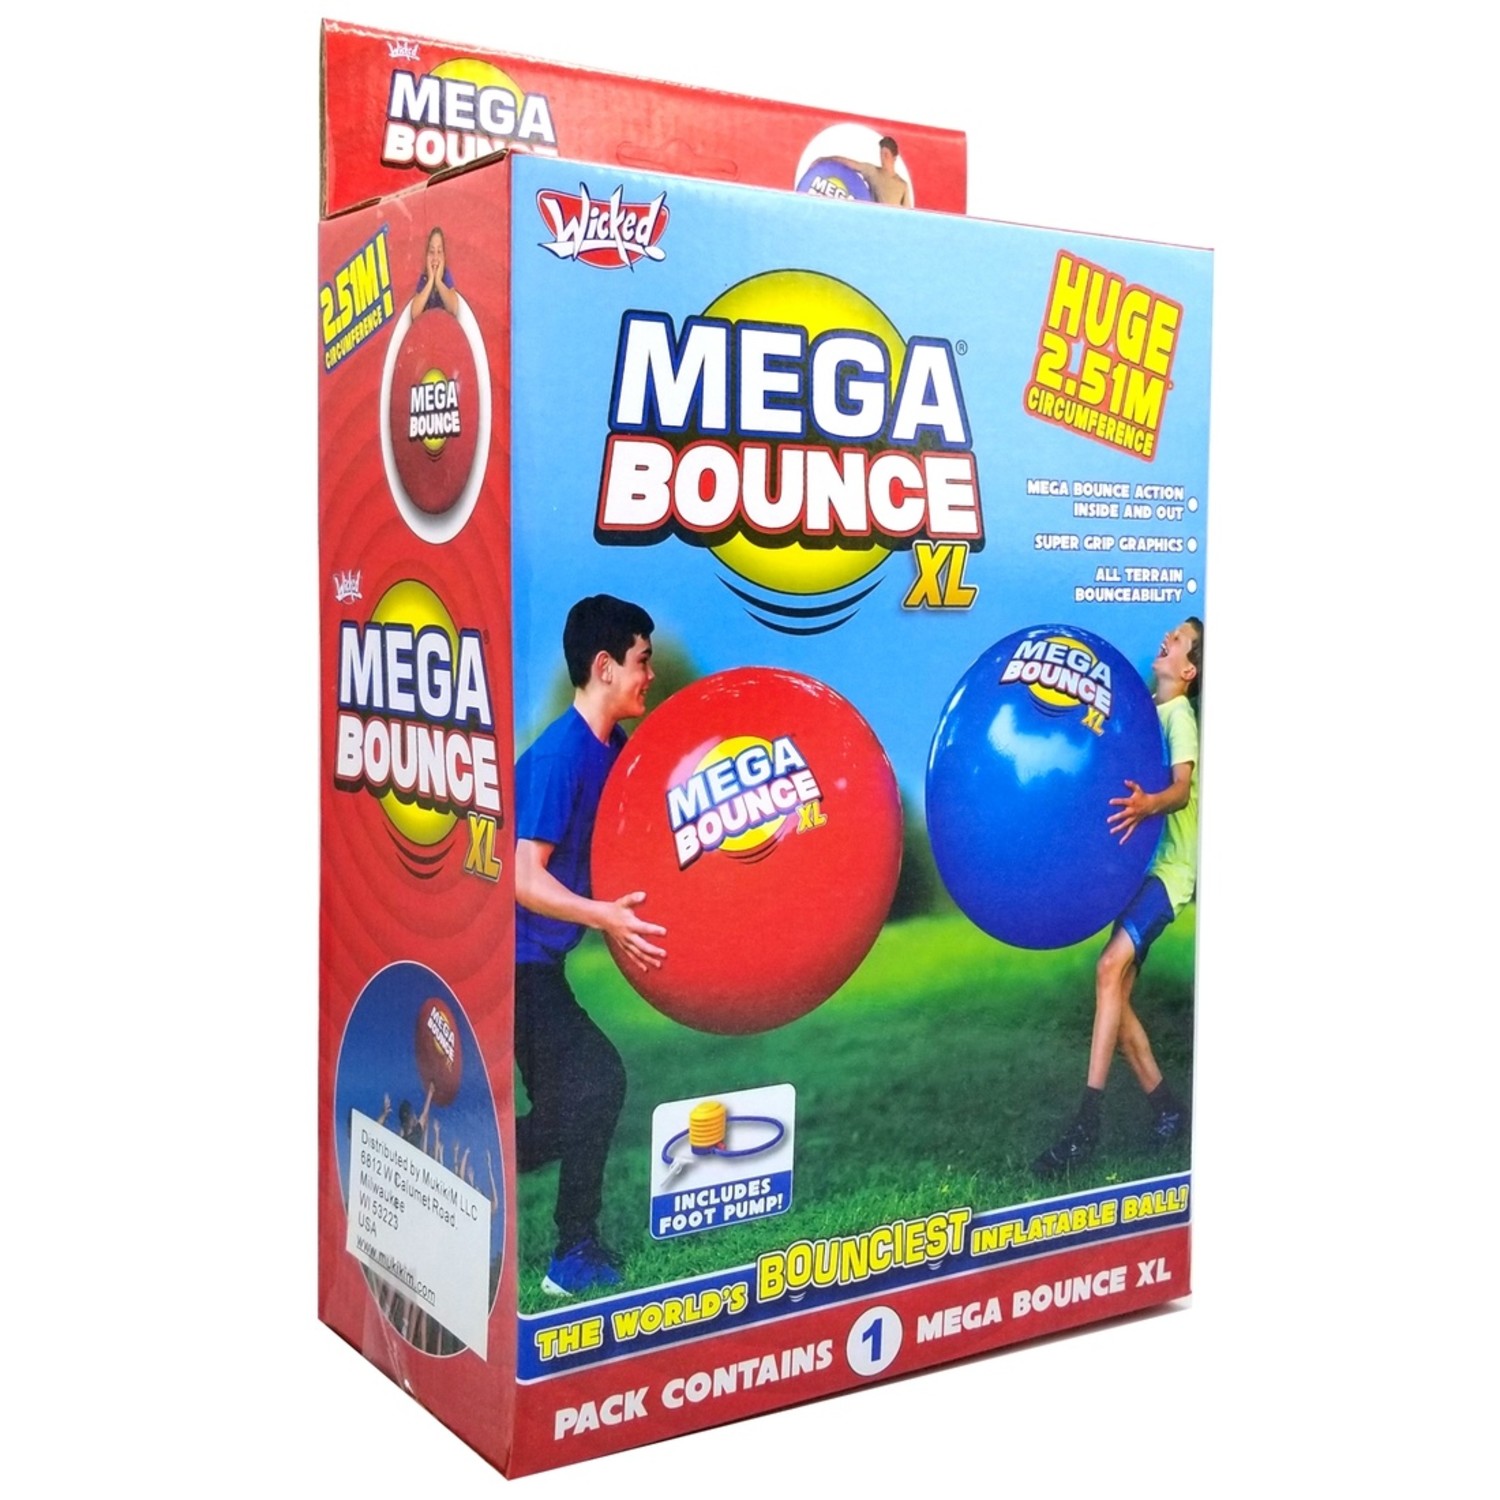 MukikiM - Wicked Mega Bounce XL - The World's Bounciest Inflatable Bal -  Yellow Turtle